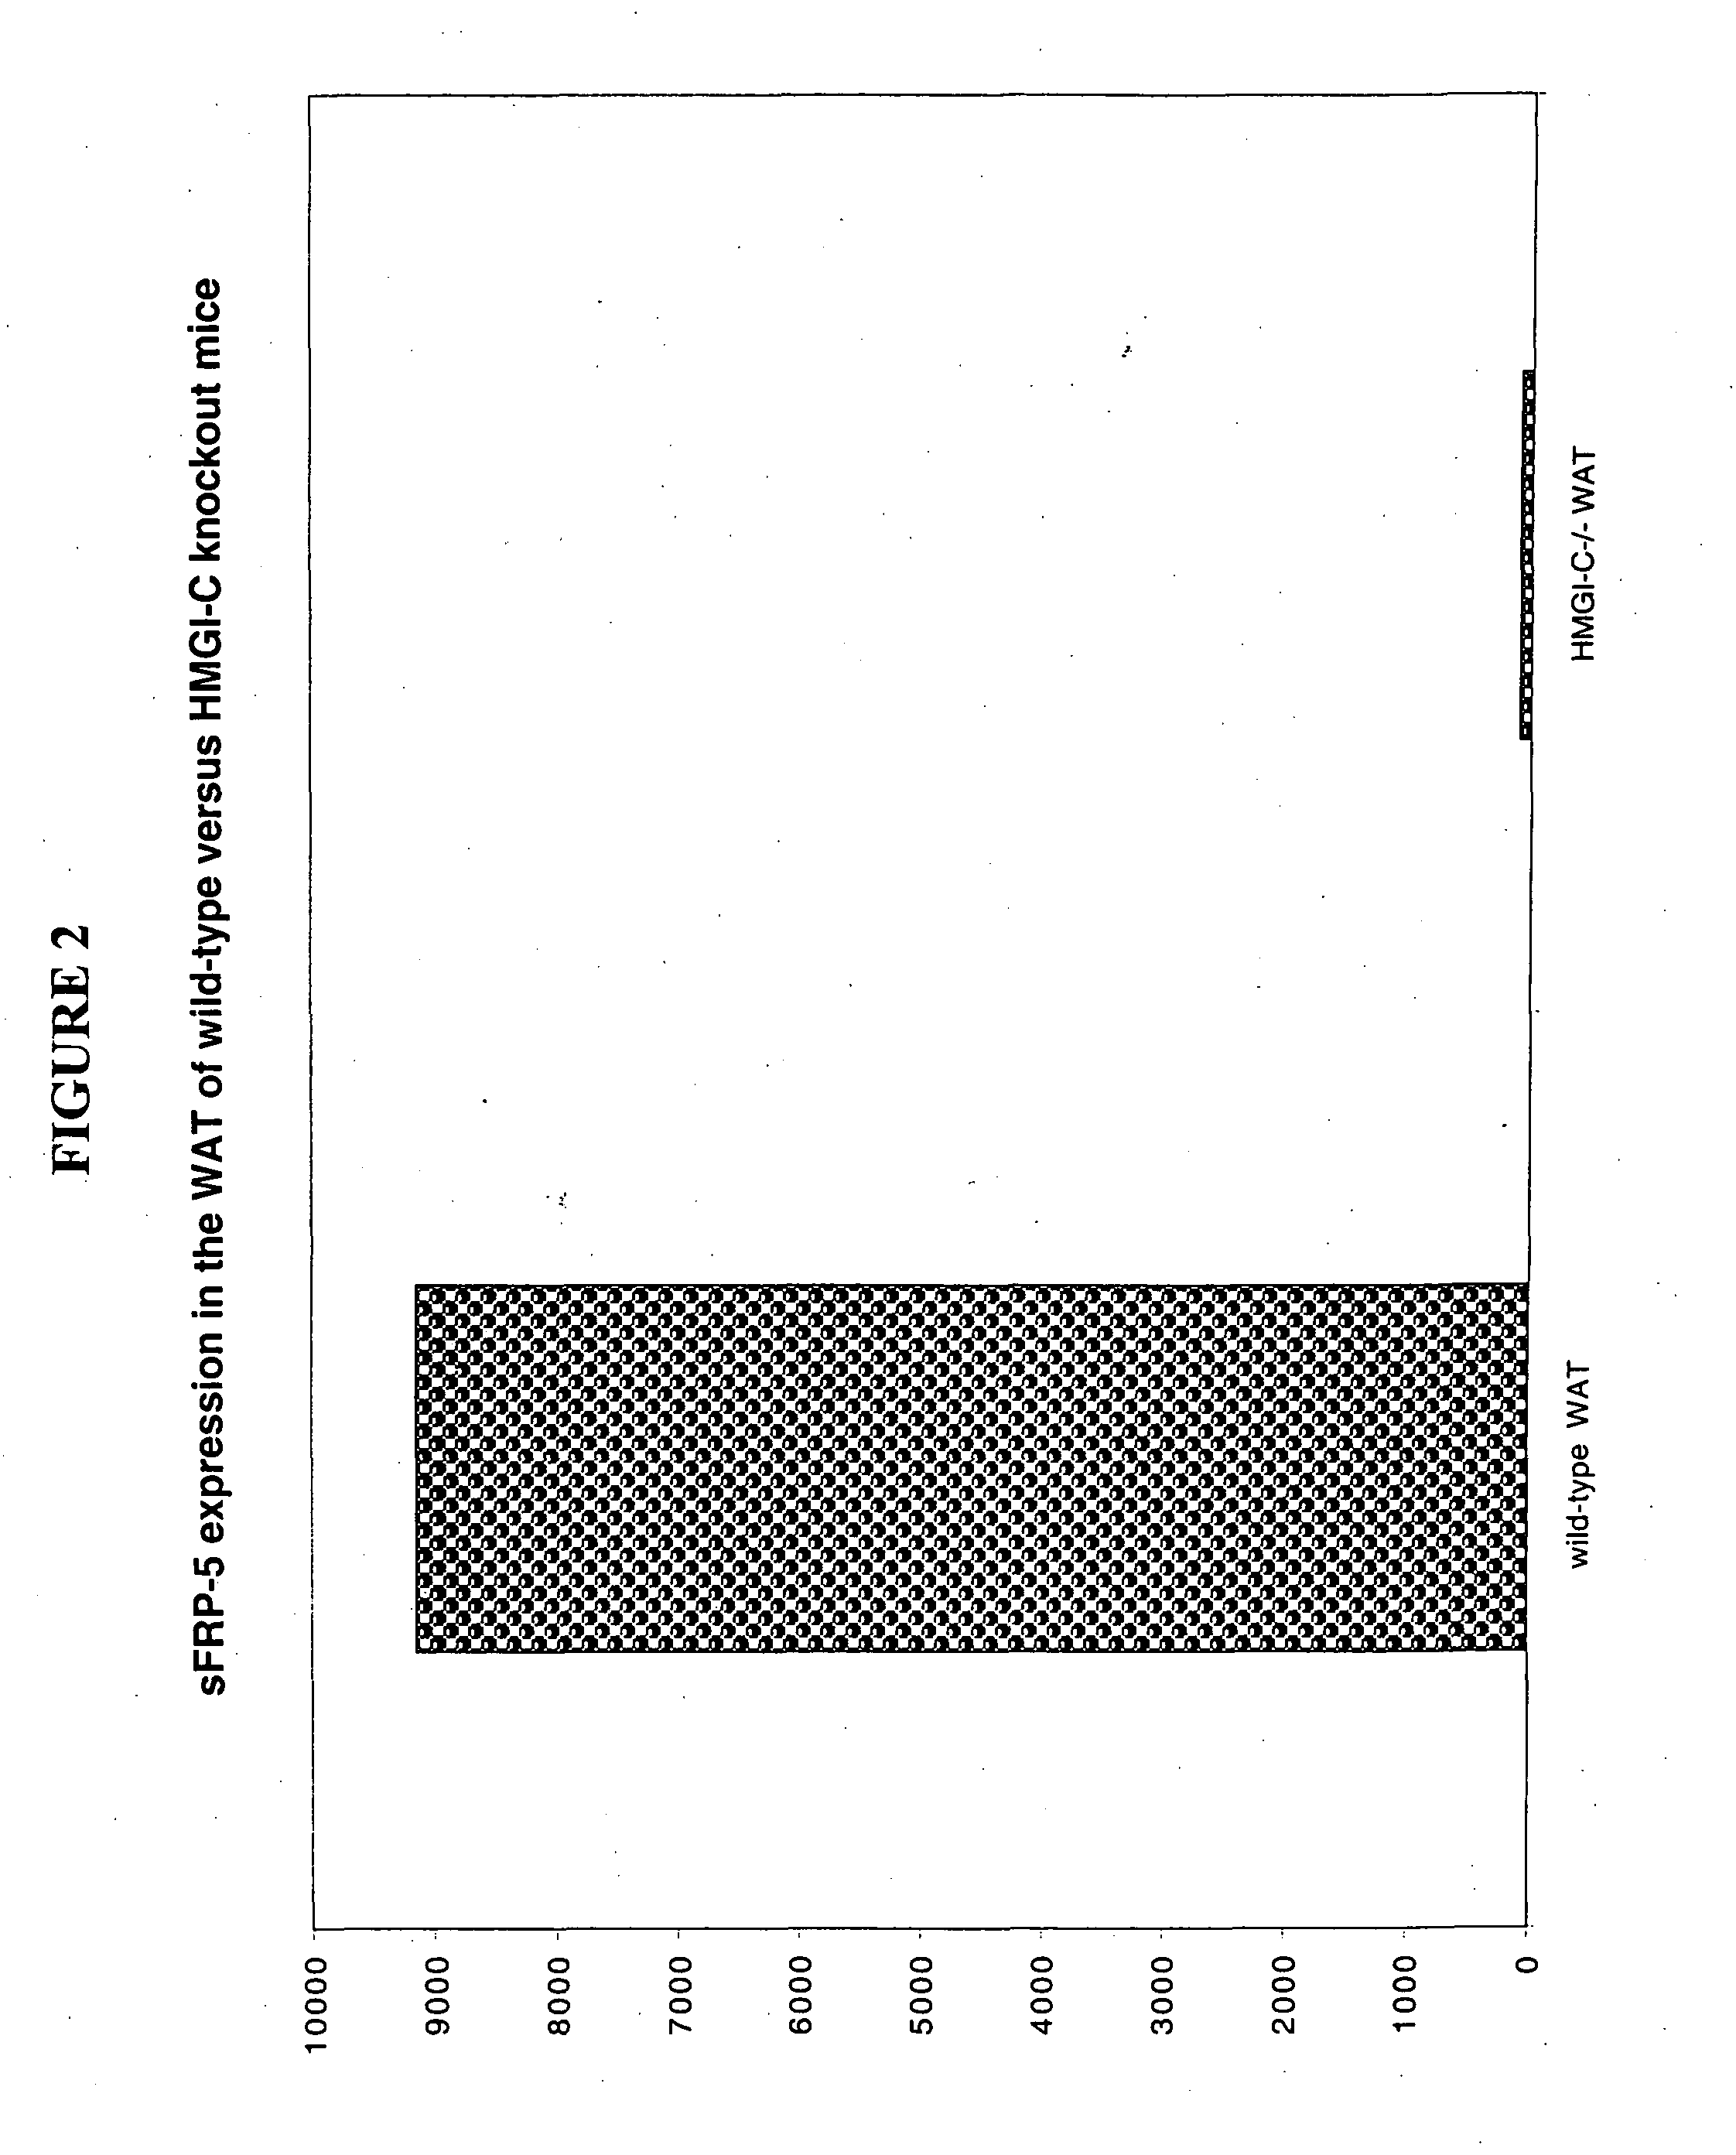 Methods of identifying adipocyte specific genes, the genes identified, and their uses